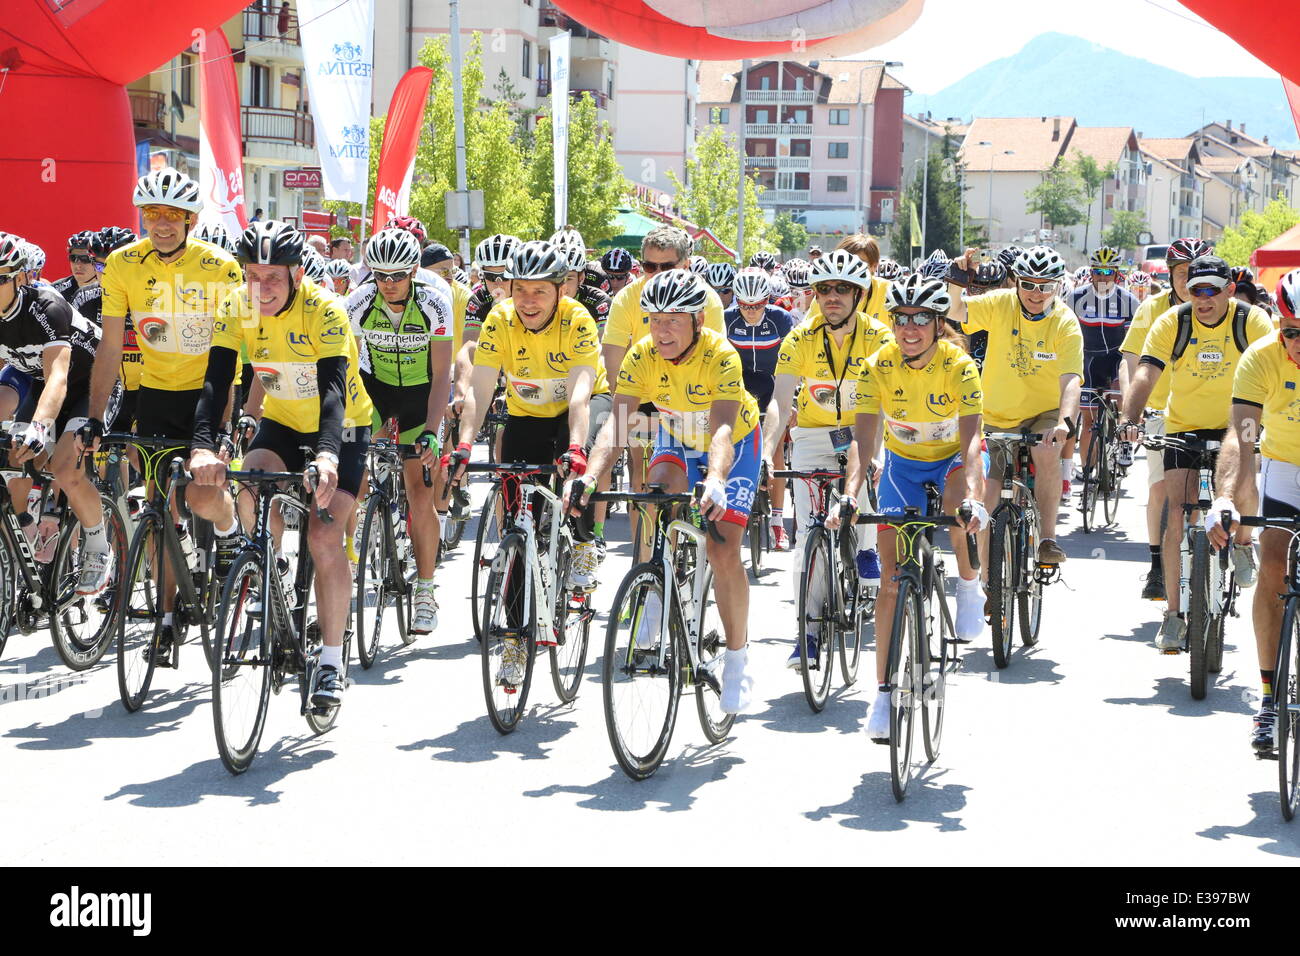 Sarajevo, Bosnia-Herzegovina. 22nd June, 2014. Cyclists prepare to partcipate in the Sarajevo Grand Prix in Lukavica nearby Sarajevo, Bosnia-Herzegovina, on June 22, 2014. About 140 professional cyclists participated in the Sarajevo Grand Prix (SGP) with a tour of 140 kilometers. SGP was supported by Tour de France. Credit:  Haris Memija/Xinhua/Alamy Live News Stock Photo